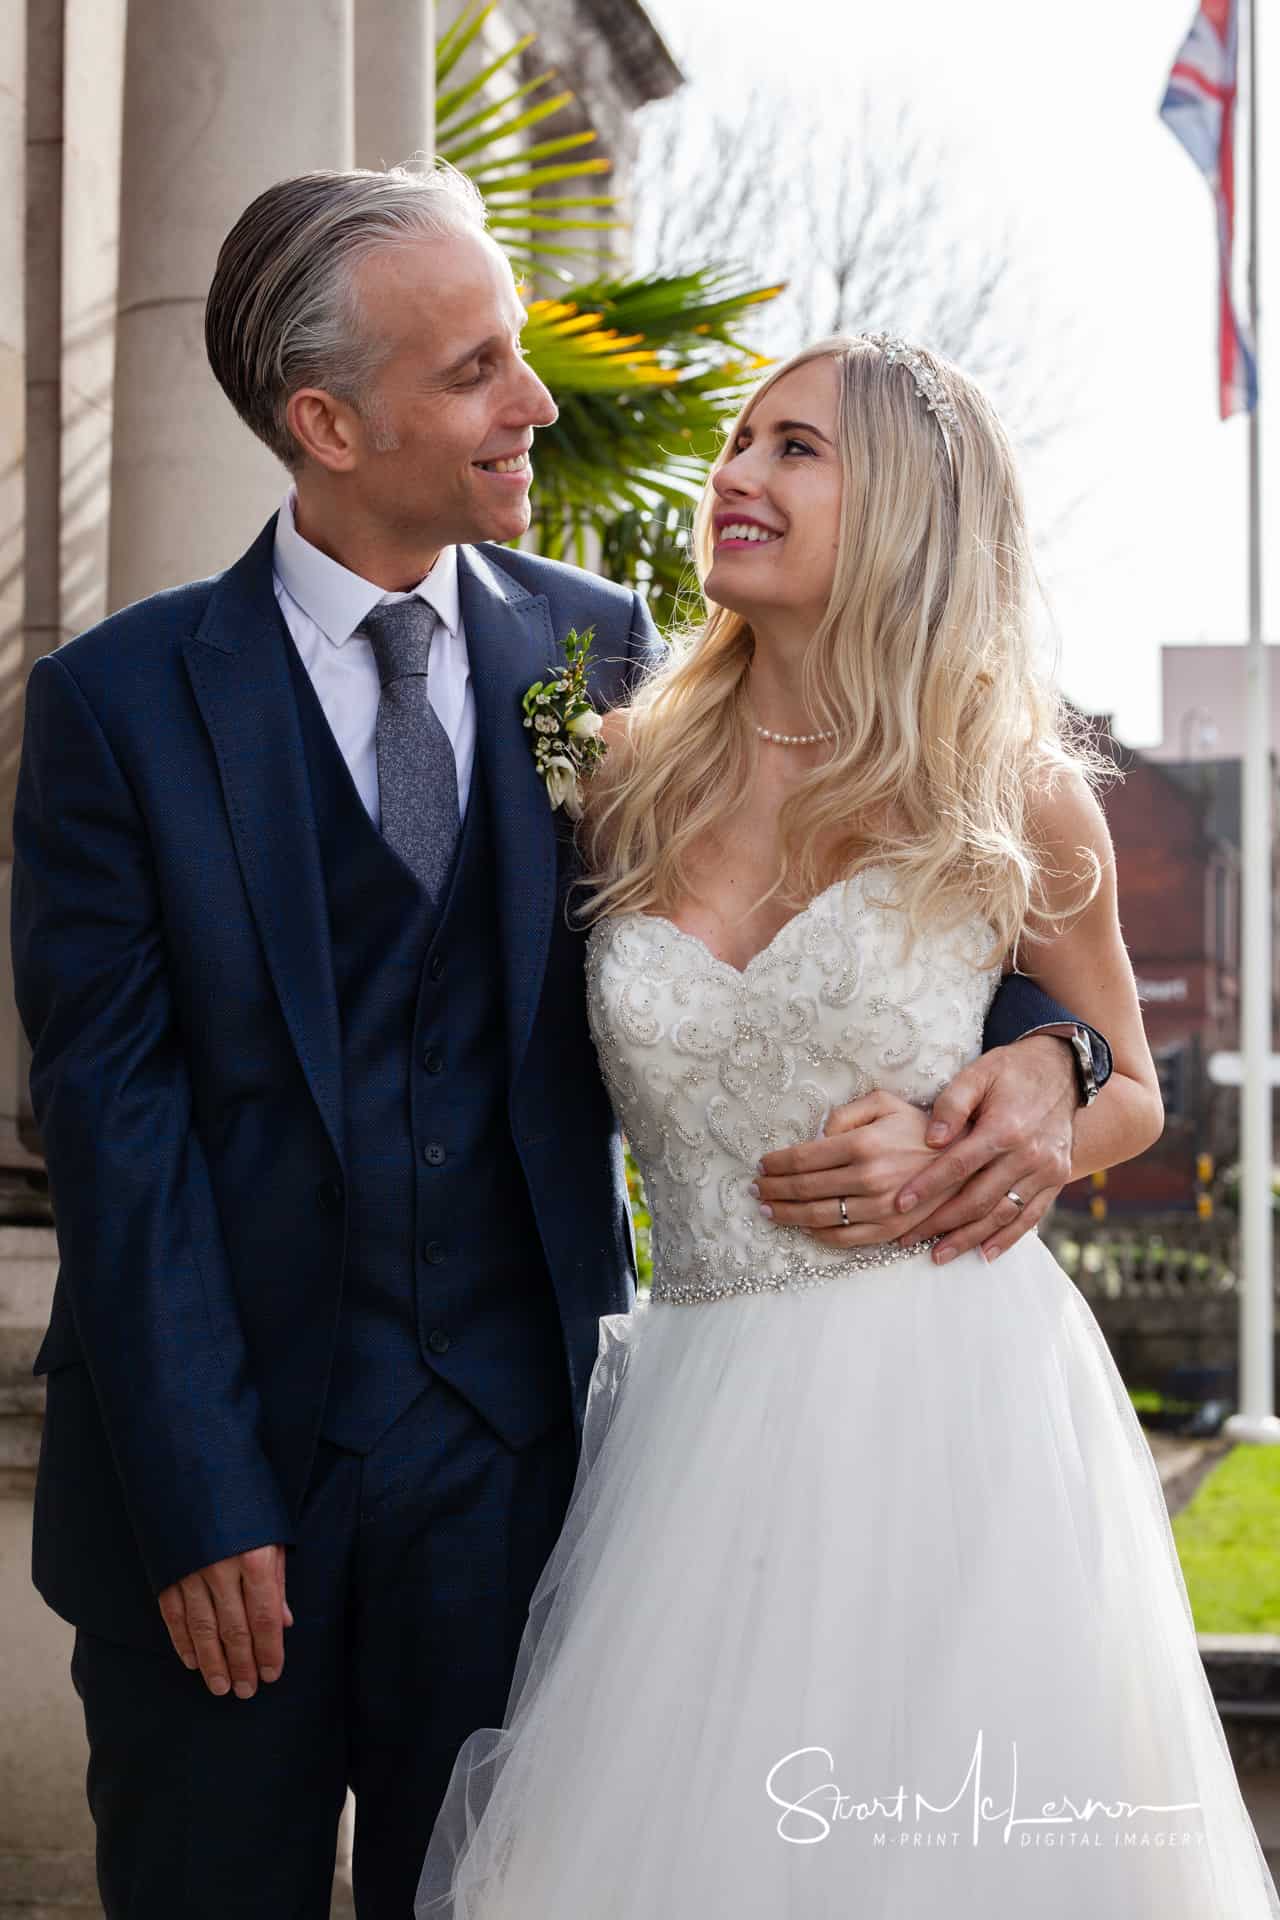 Stockport Town Hall Wedding Photography by Stuart McLernon